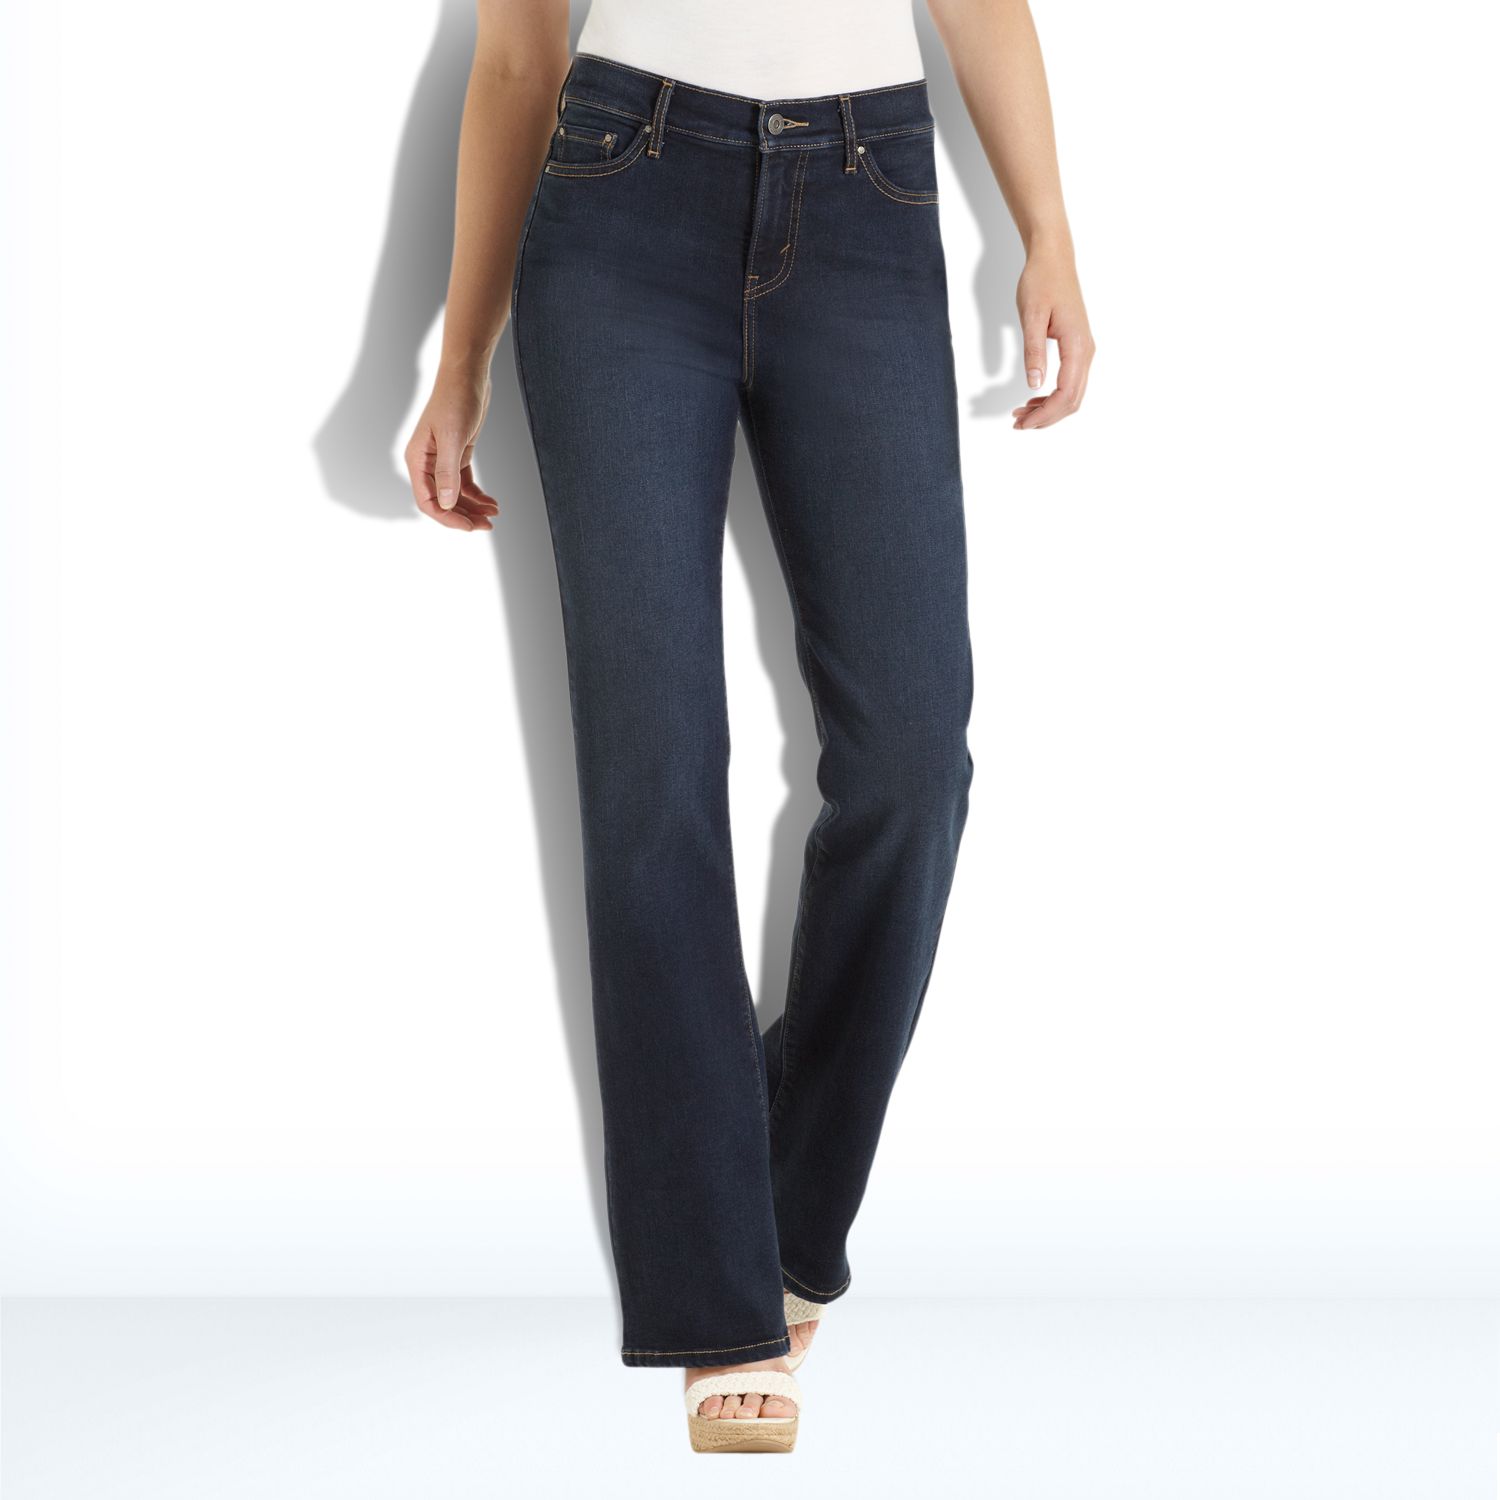 levi's 512 perfectly slimming bootcut jeans